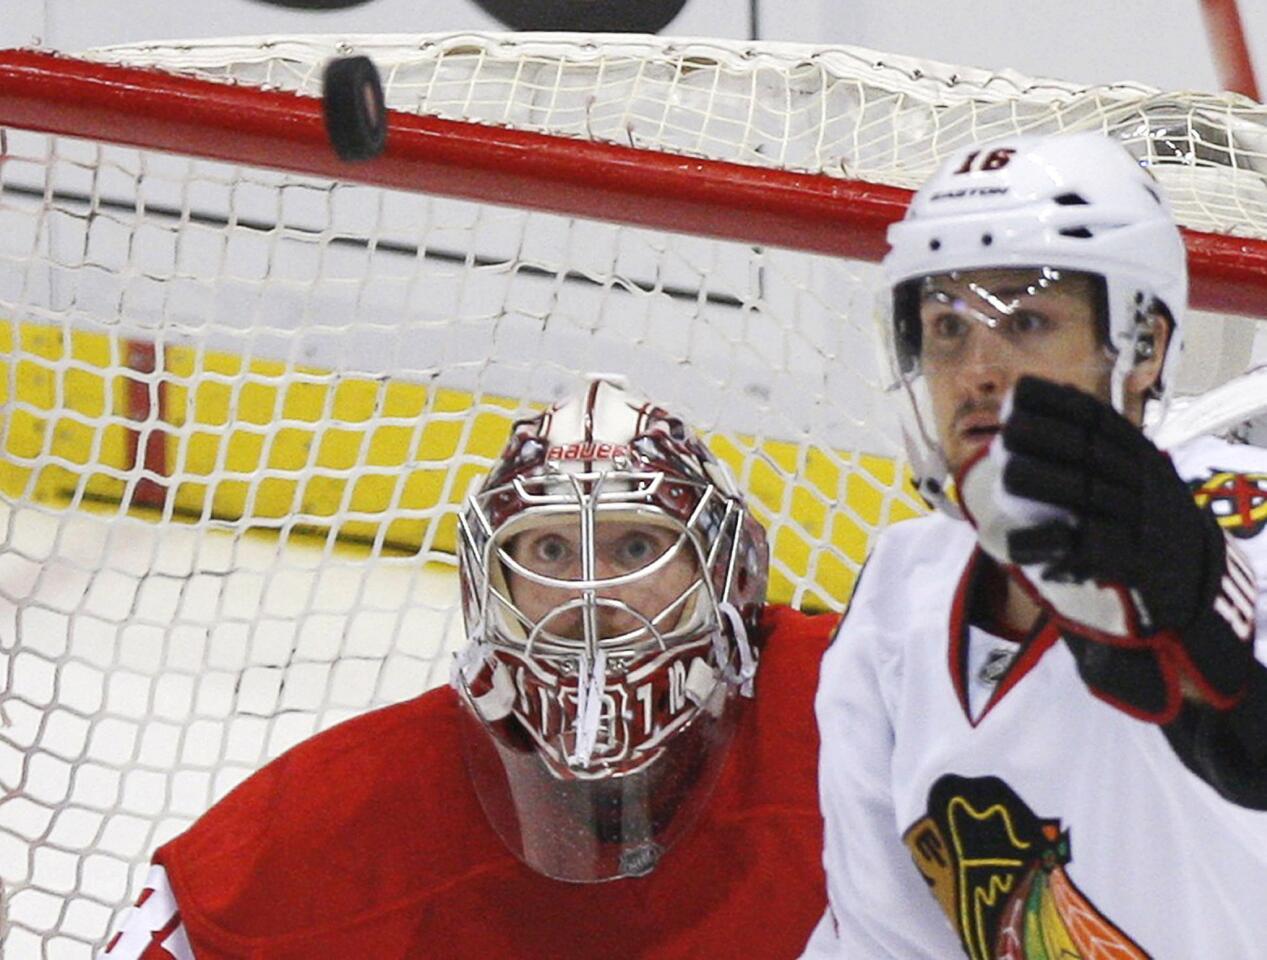 Detroit Red Wings goalie Howard keeps his eyes on the puck as Chicago Blackhawks' Kruger comes into the play during their NHL Western Conference semi-final hockey playoff game in Detroit